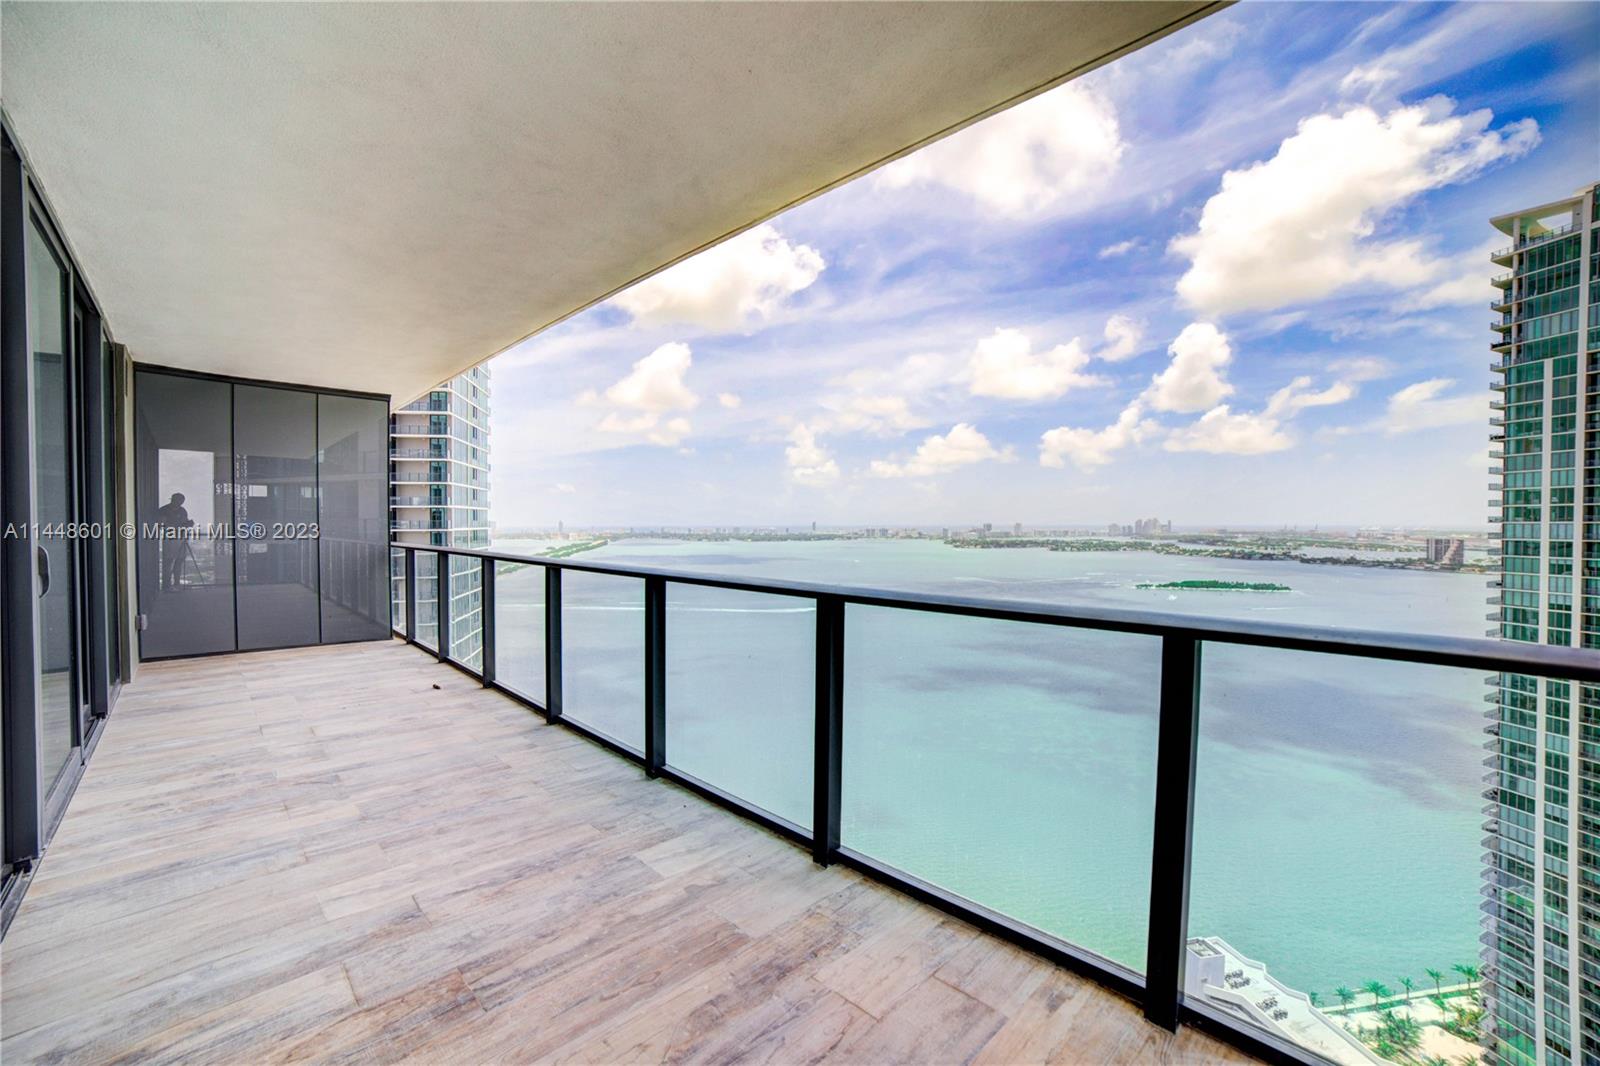 Located on the 40th floor, this stunning Corner 4 Bedroom/ 4 baths Skyvilla is a true gem With a private entry elevator and 360 degree views water views of Miami Beach, Venetian Islands, Downtown and Midtown, this flowthrough corner unit is and biggest line in Paraiso Bay. With waterviews from every room and incredible amenities, there is no comparaison on the market Be the first to call this beautiful 2, 246 Sq Ft 4bed/4.5Bath + Den home! Brand new corner unit features sweeping unobstructed bay views, floor to ceiling lass windows, and a private foyer! Sub Zero and Bosch Appliances. Unrivaled amenities Include state of the art theater for a movie night, billiards room, resort style pool and fitness center, bowling alley , 2 lighted tennis courts, and walking distance to bay front park .